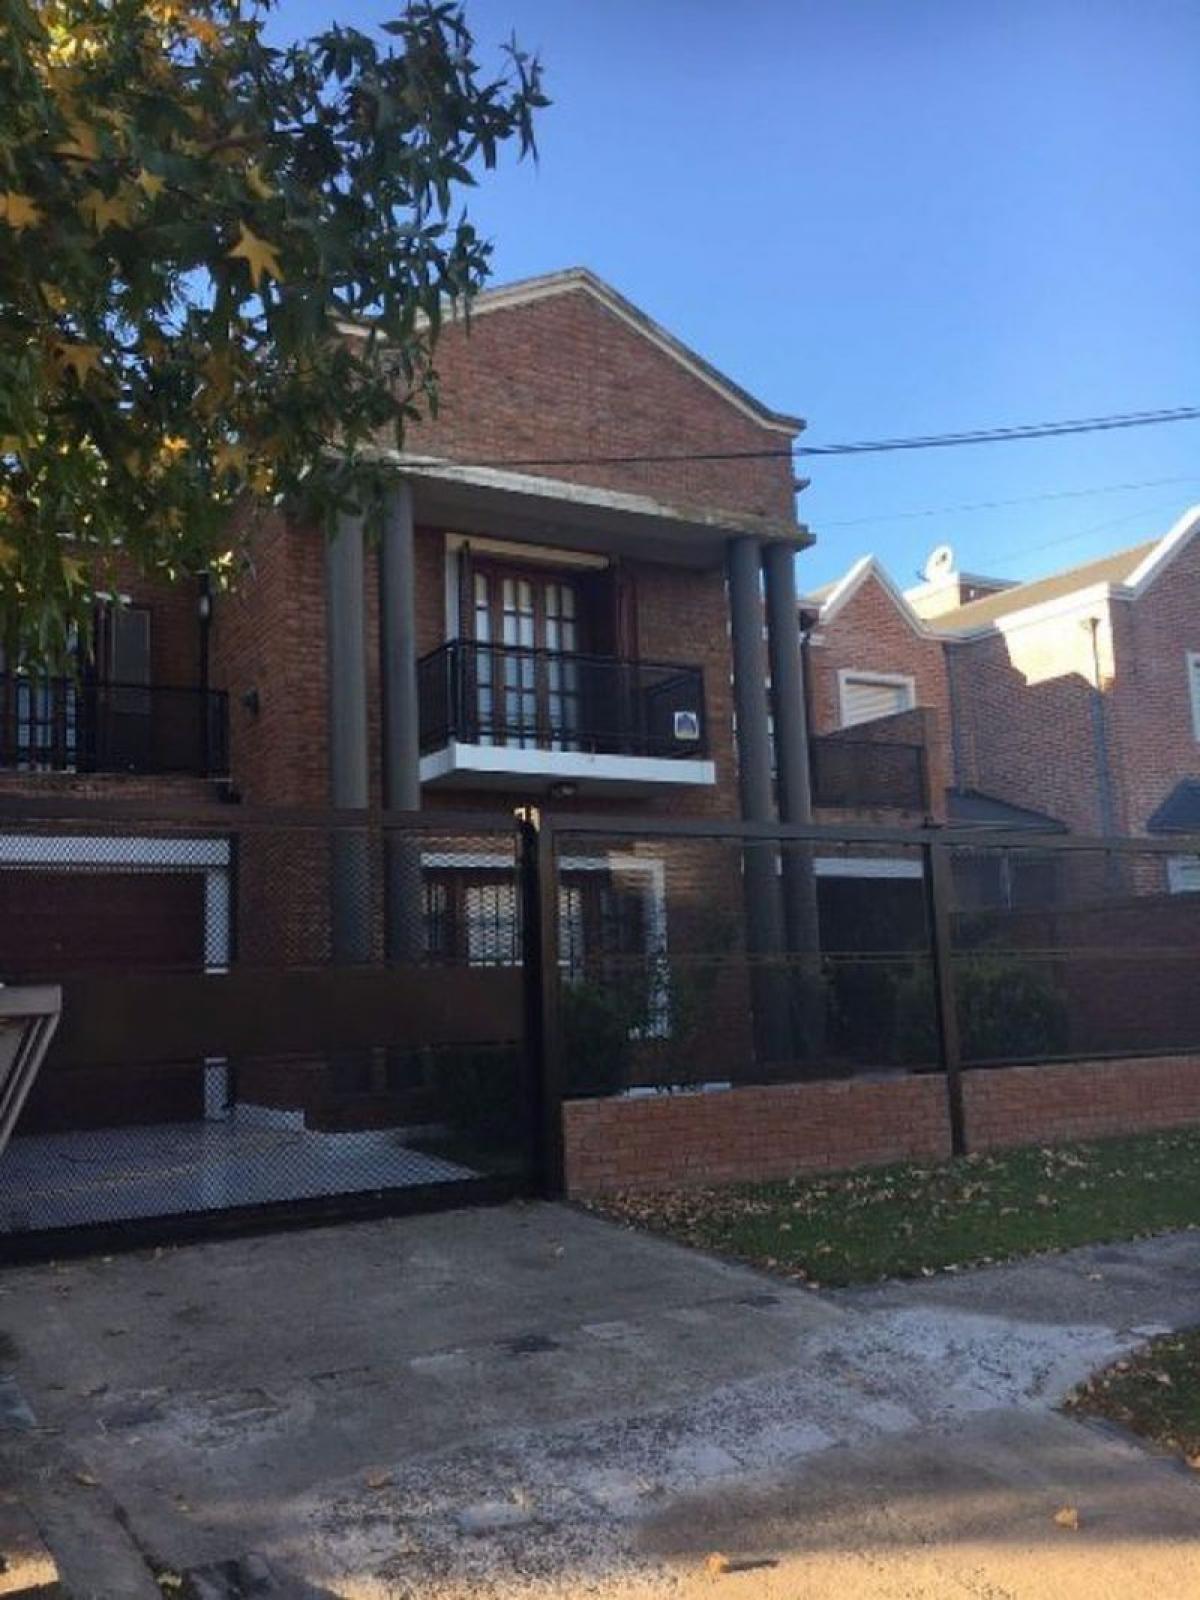 Picture of Home For Sale in Canuelas, Buenos Aires, Argentina